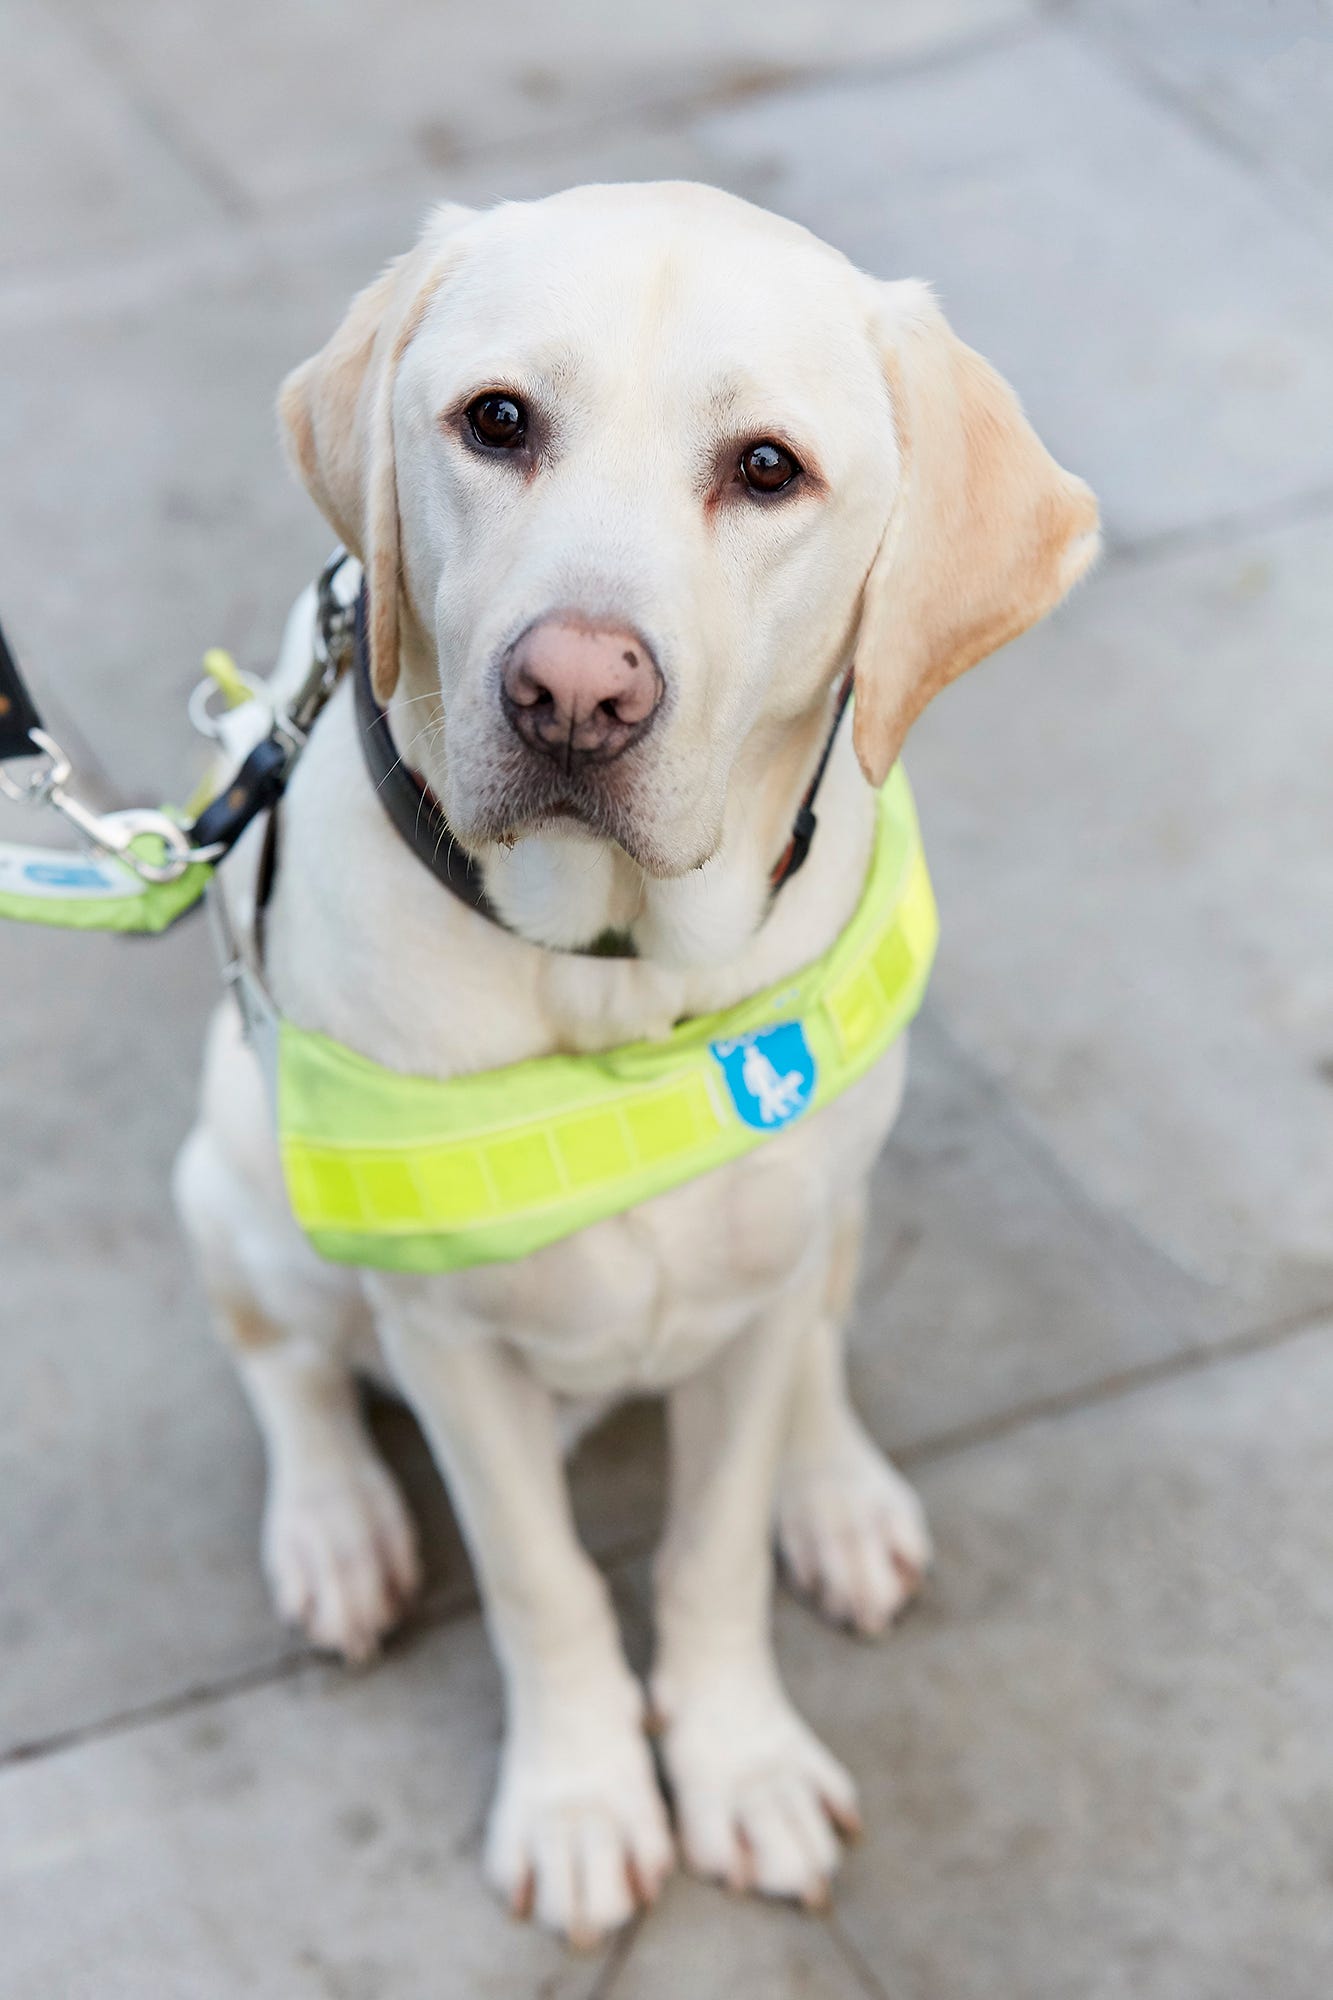 are all guide dogs labradors